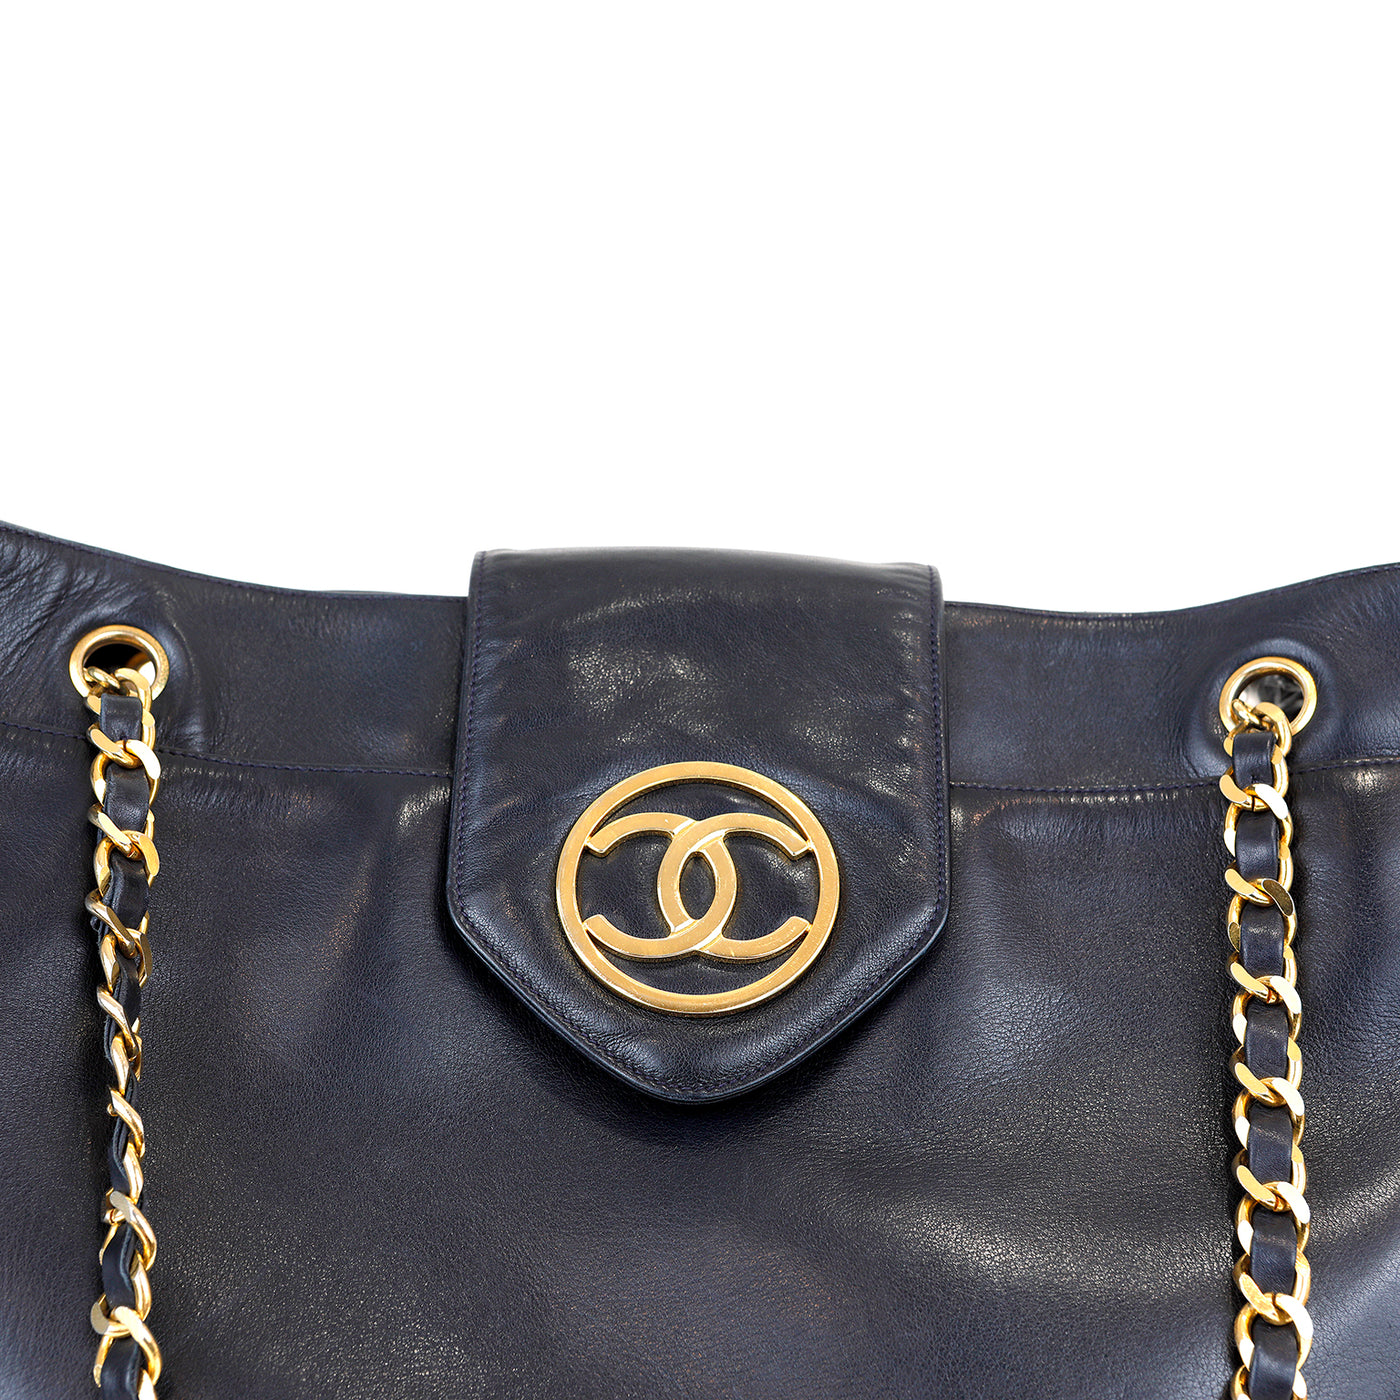 Chanel Vintage Navy Blue Lambskin Tote with Gold Hardware